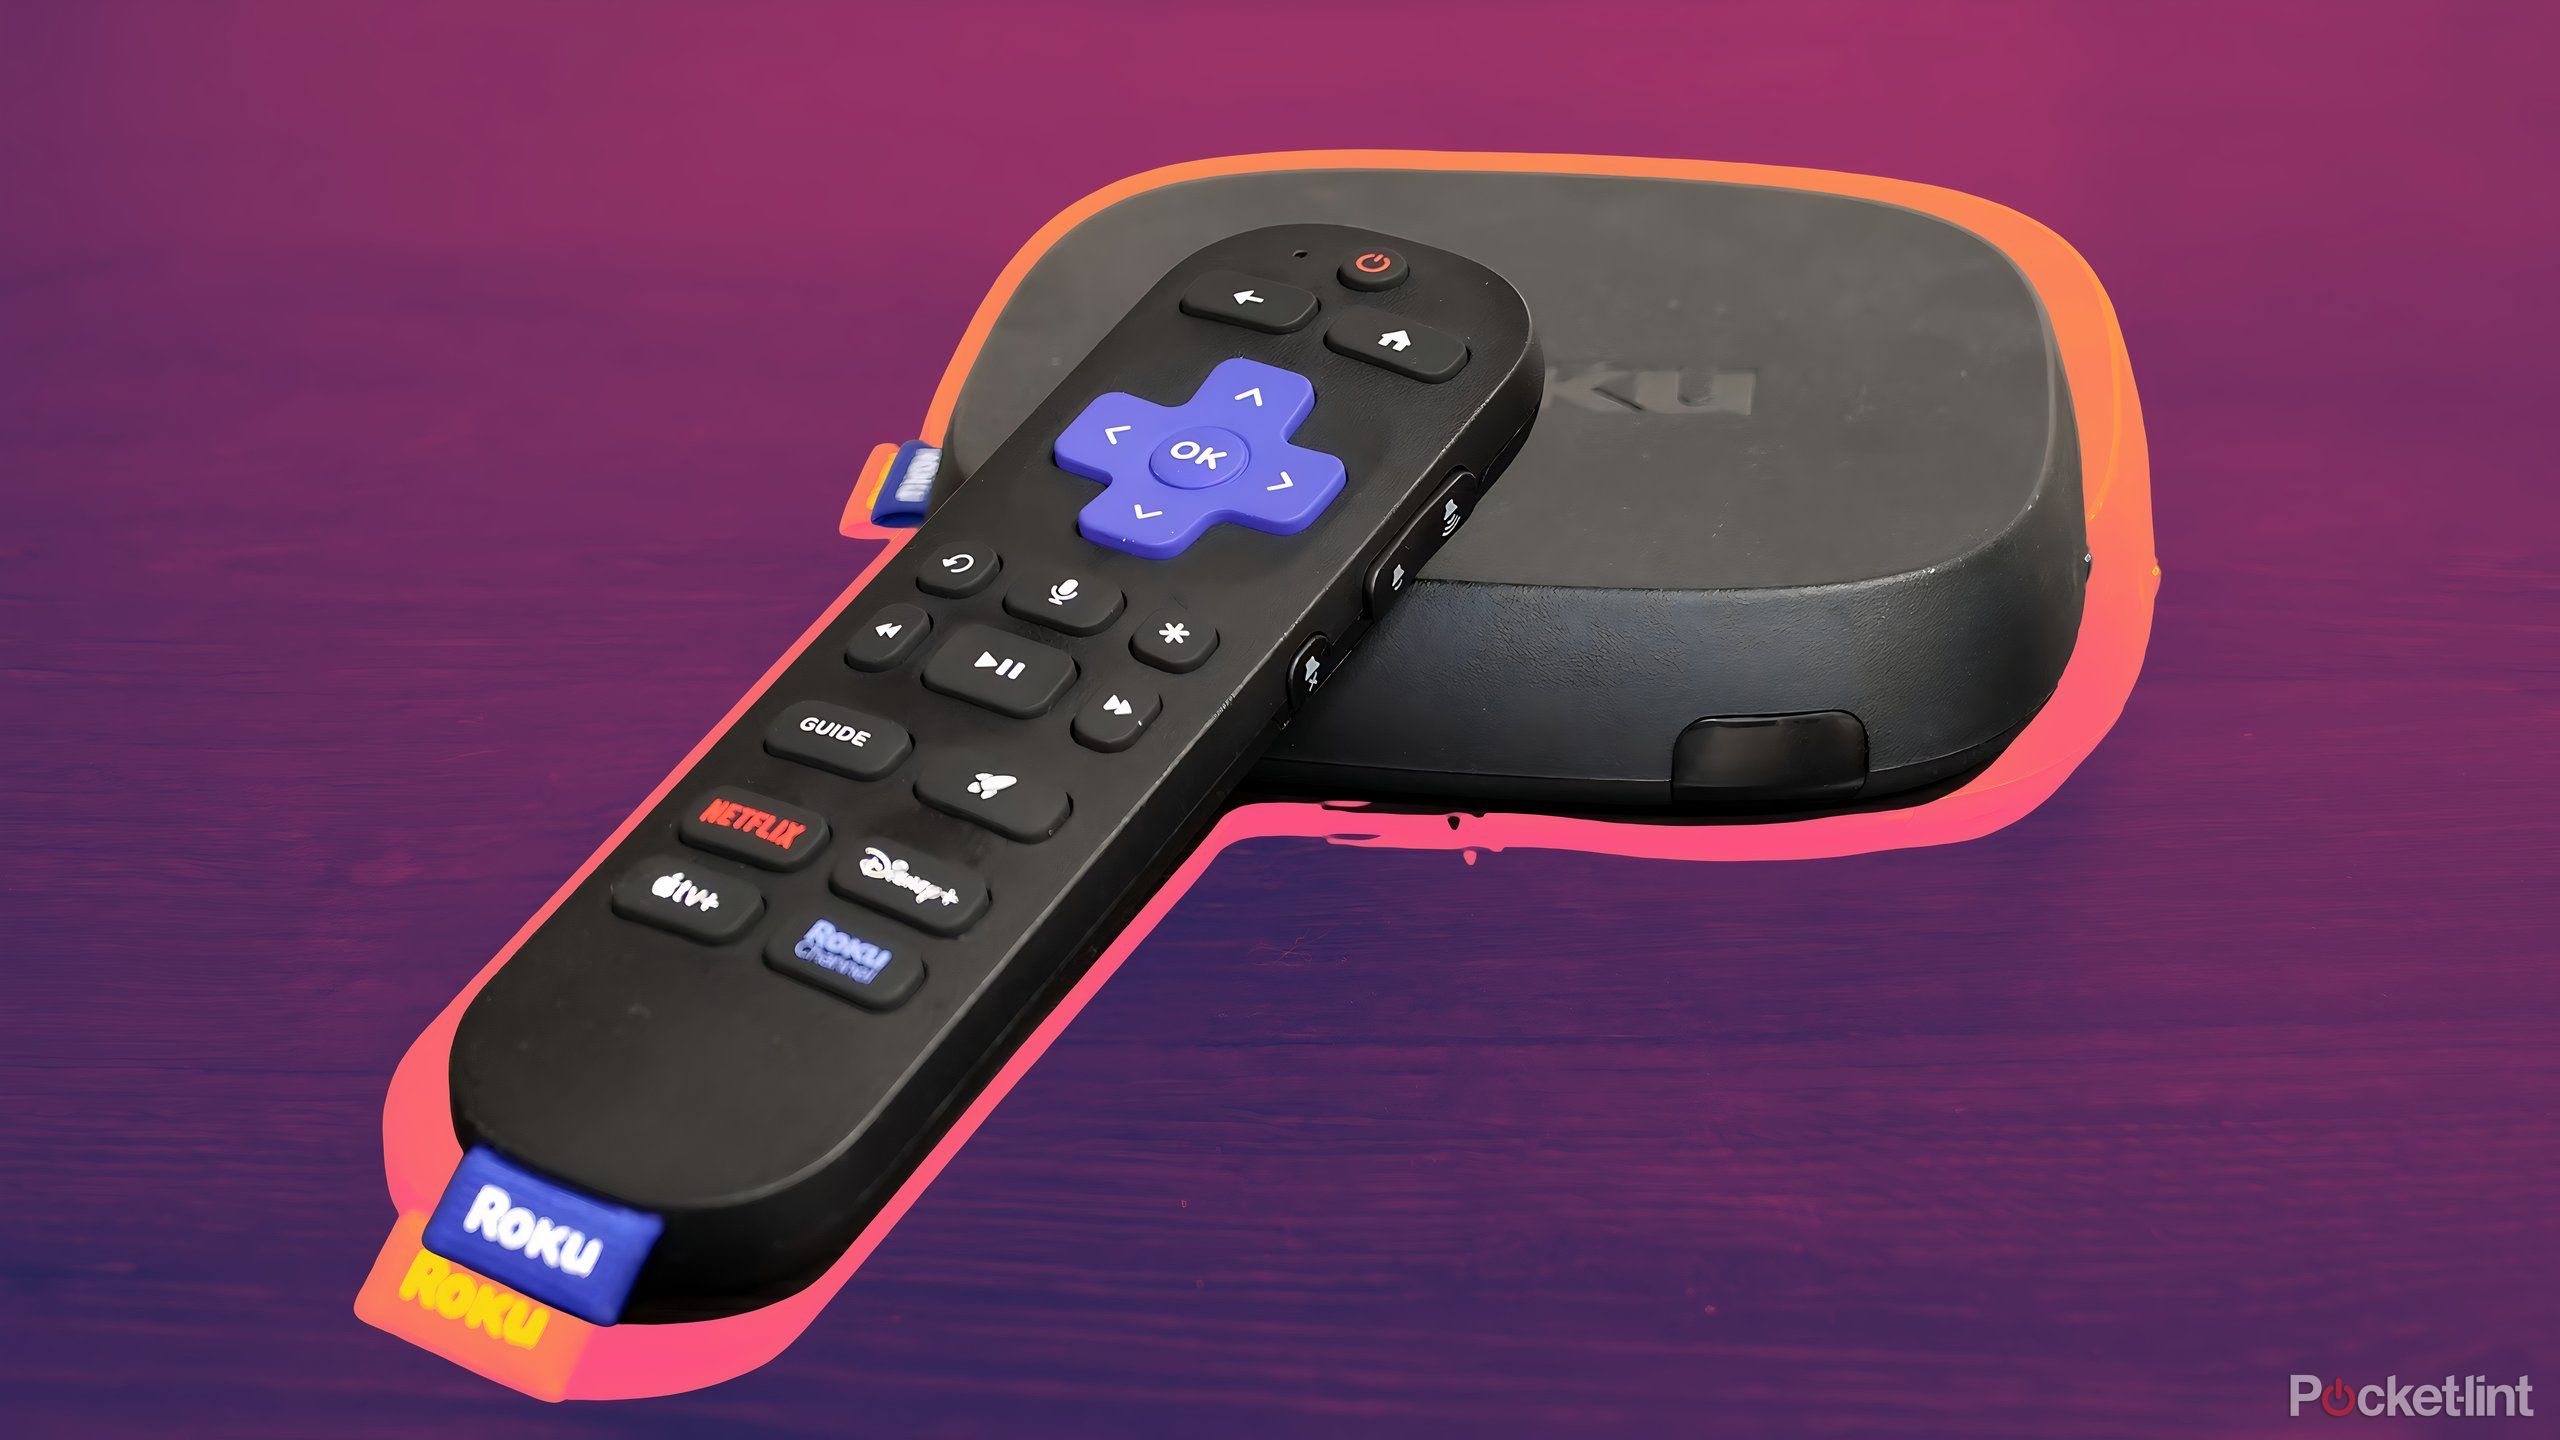 Roku Voice Remote Pro 2nd Gen review: Convenient and capable